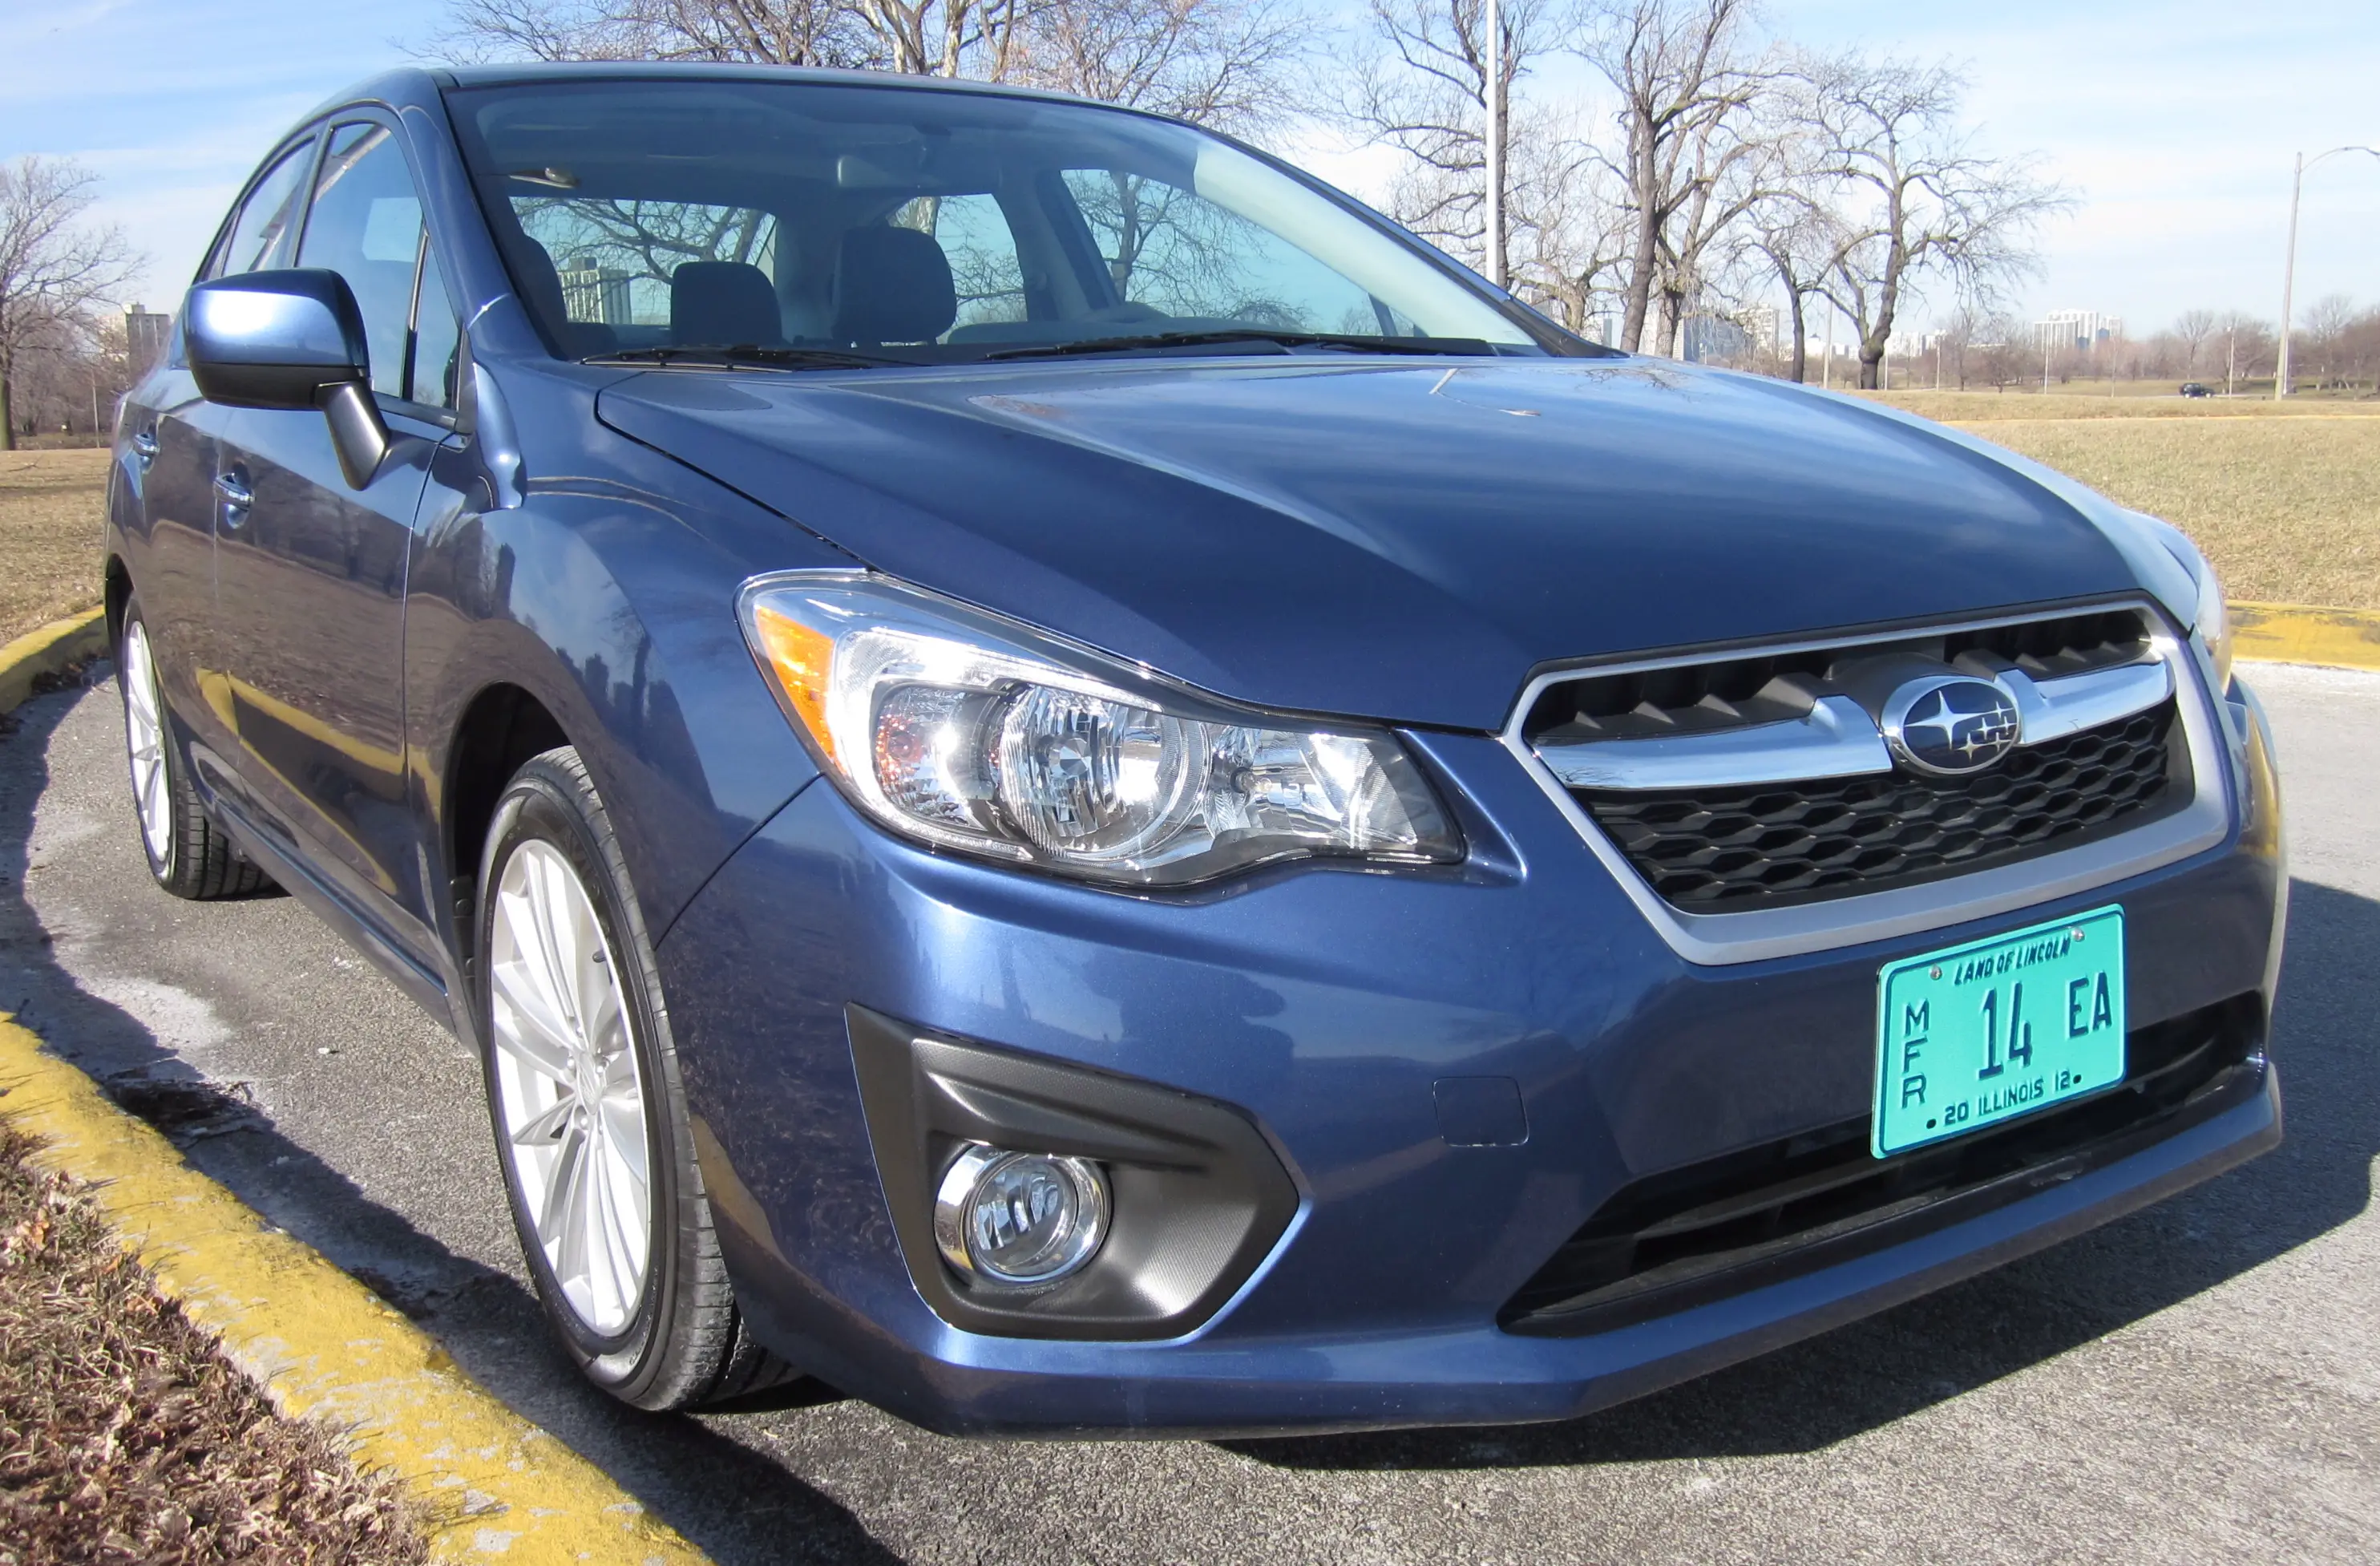 2012 Subaru Impreza 2.0i Limited Ride and Review By Larry